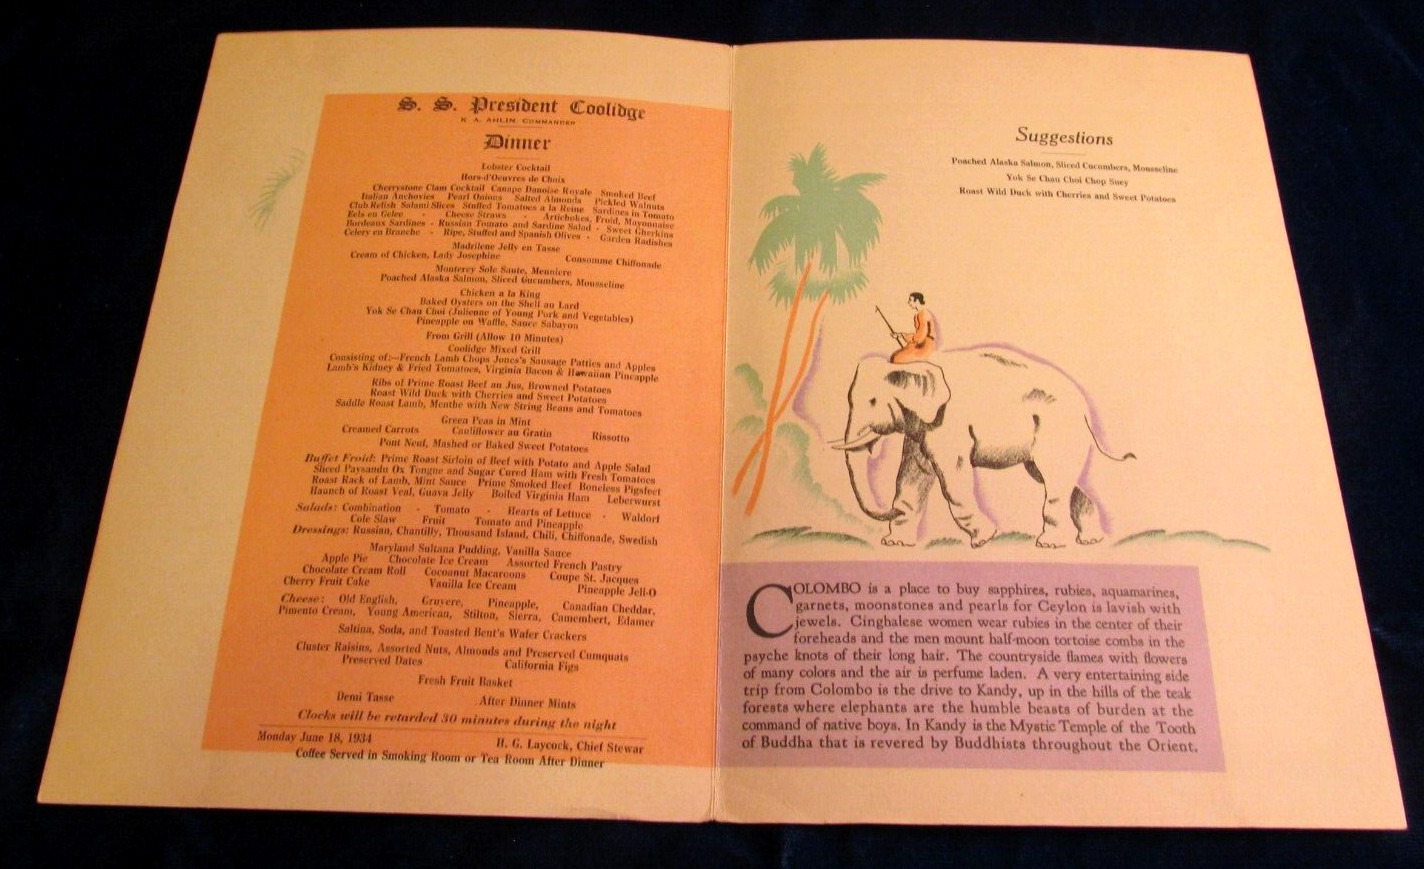 1934 Awesome Elephant on  MENU, S. S. President Coolidge Dollar Steamship Liner,